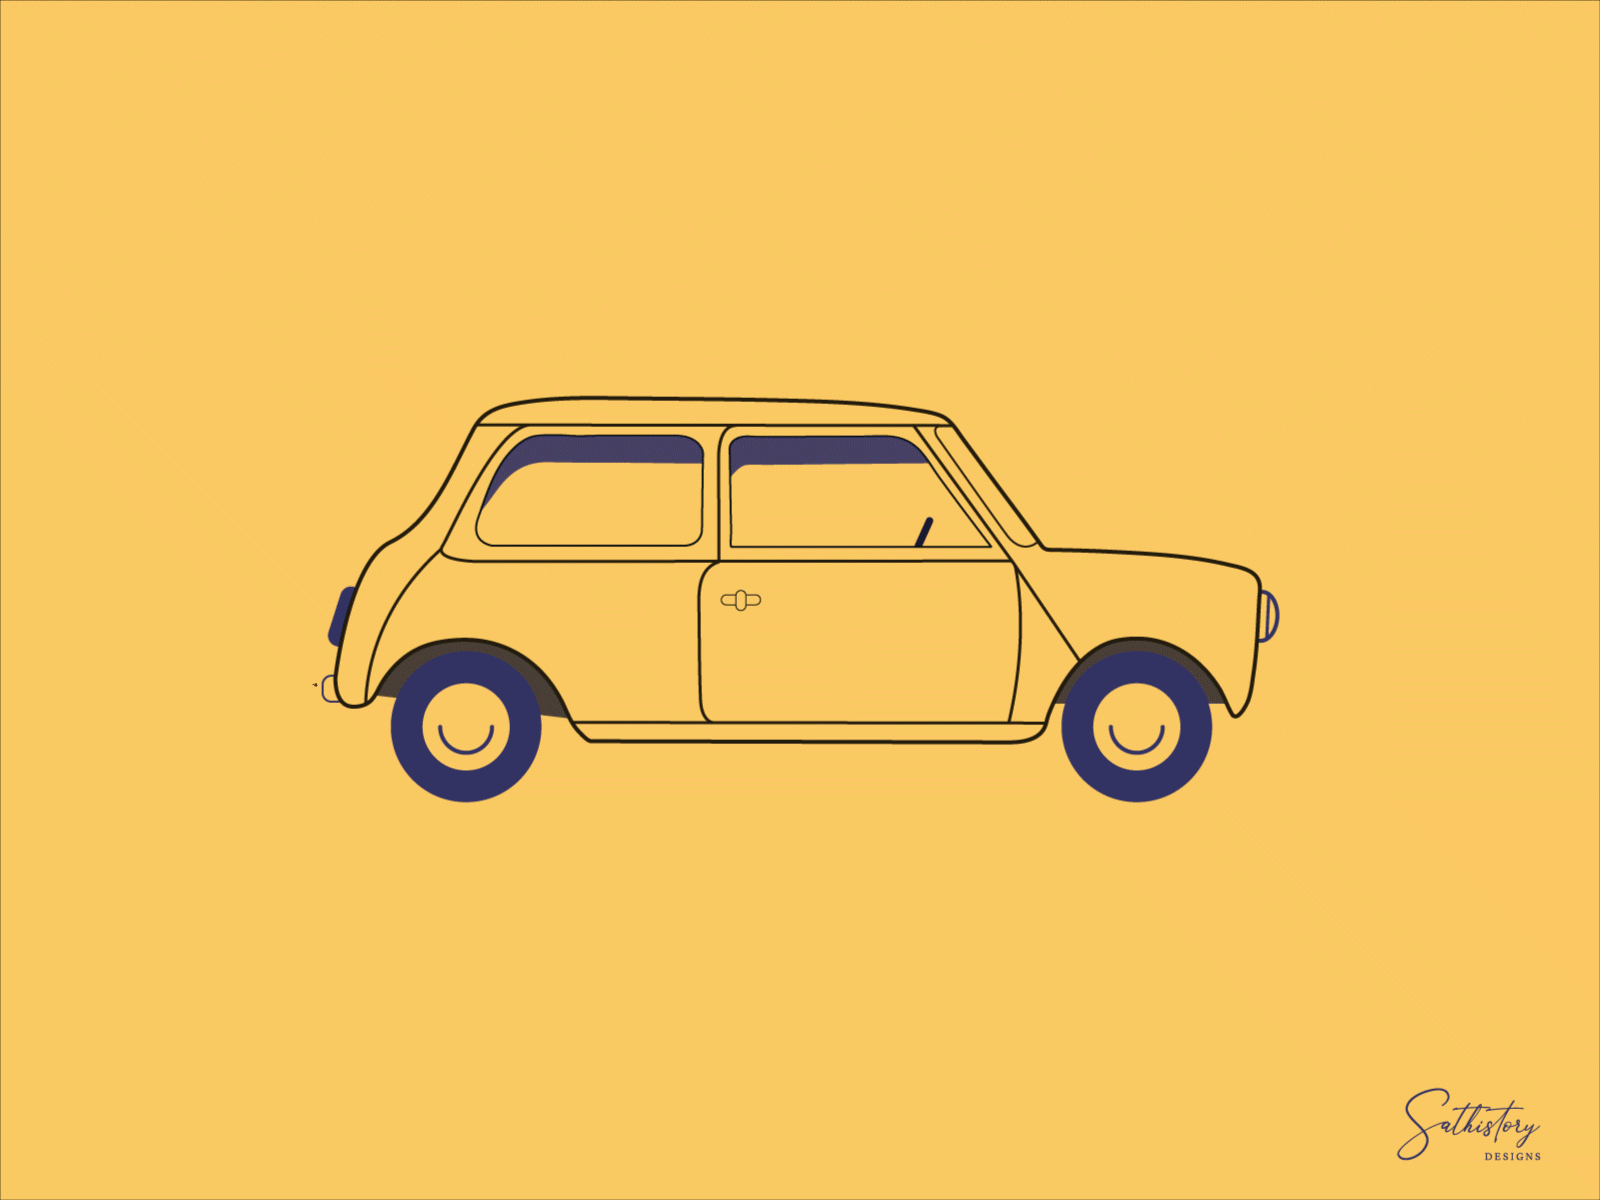 Car Animation by Sathistory on Dribbble